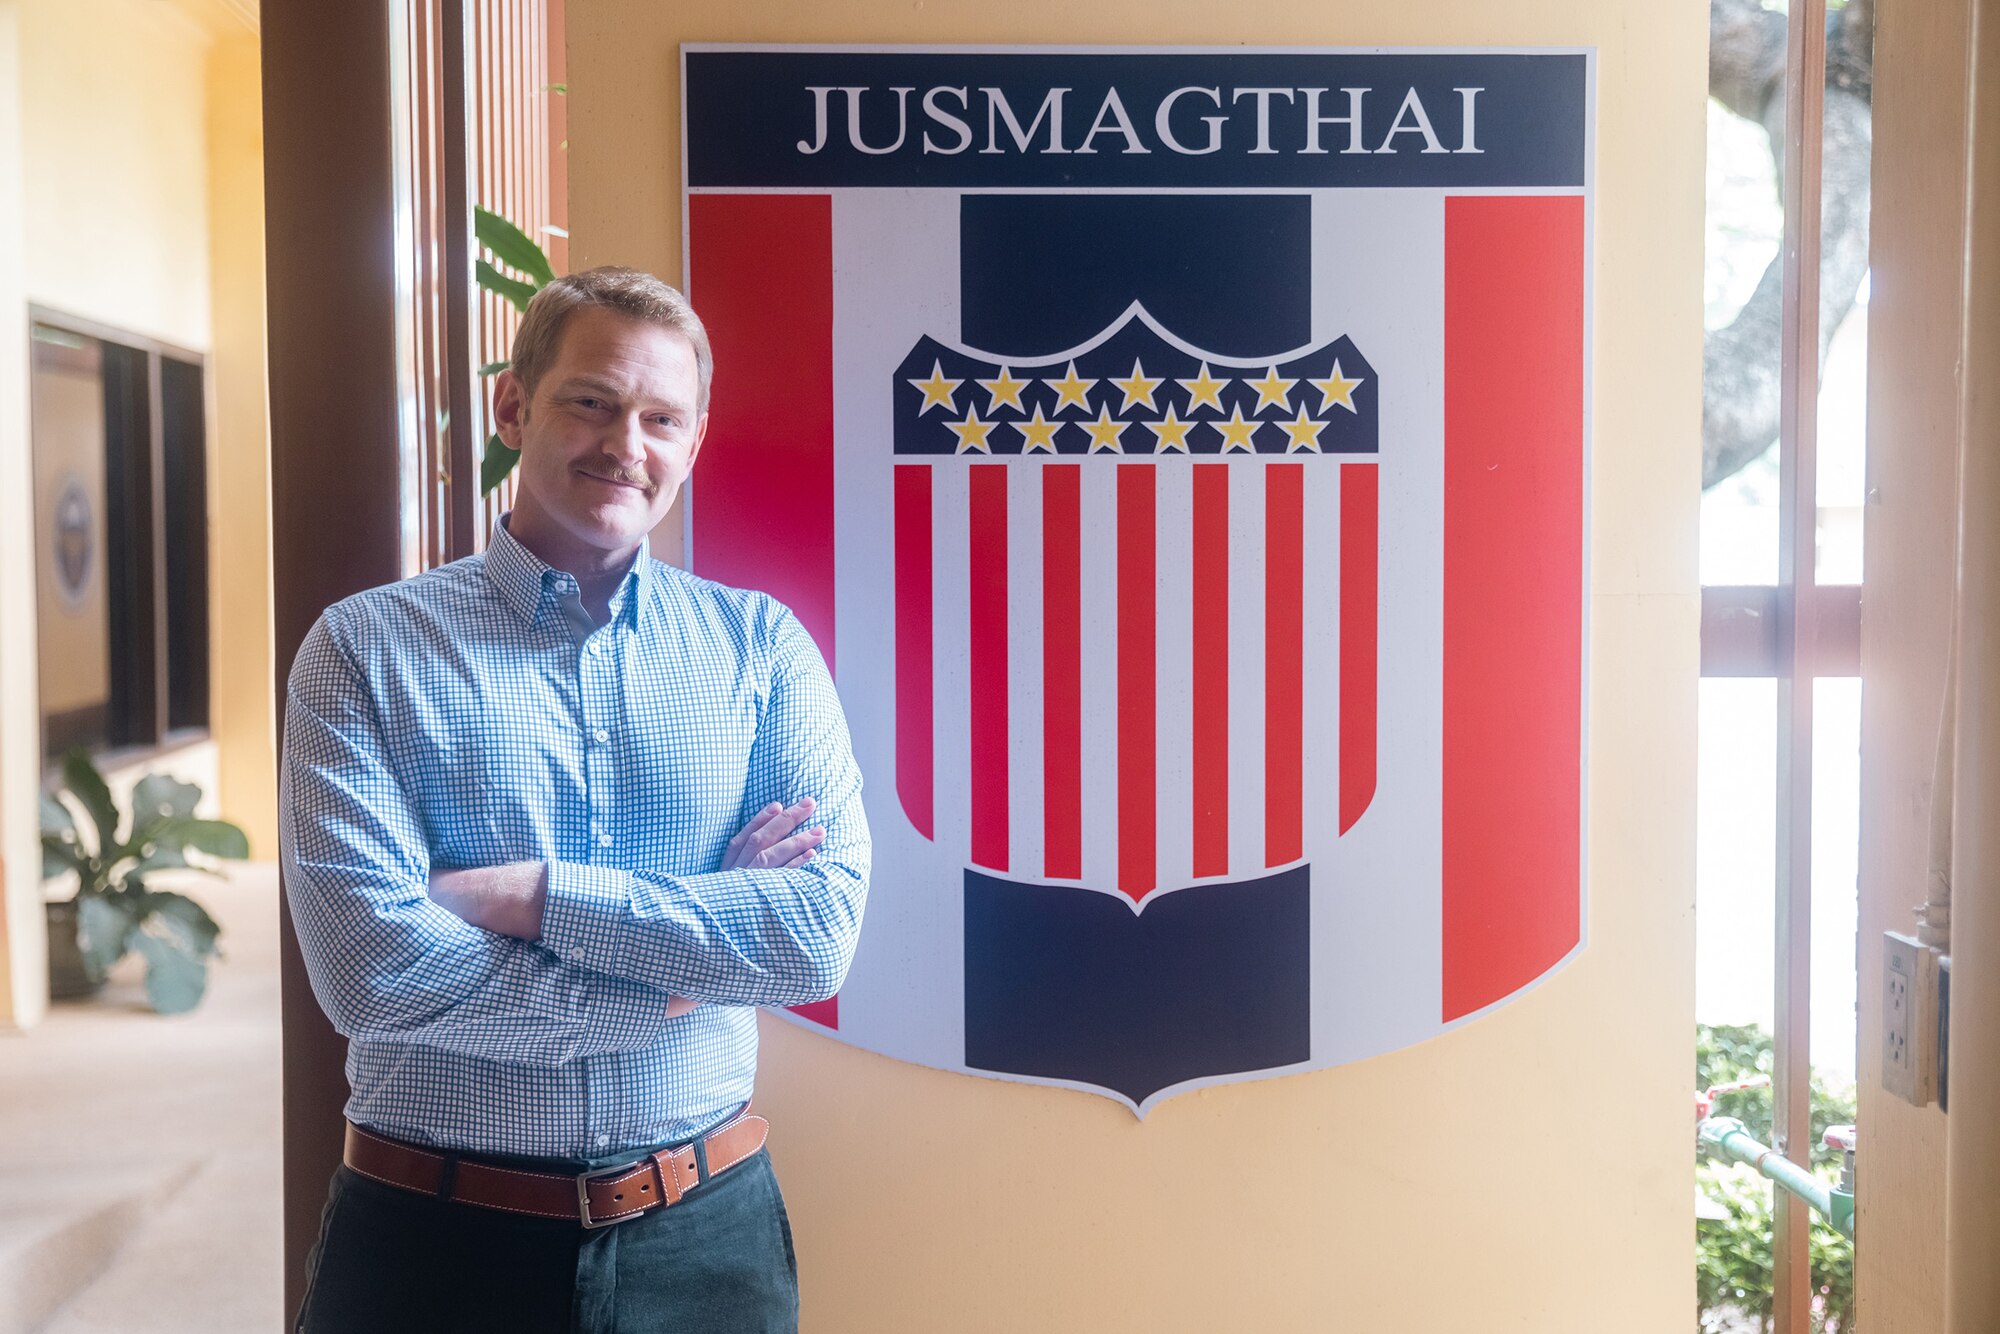 Maj. Joel Johnson, Bilateral Affairs Officer in the Kingdom of Thailand standing in front of the Joint US Military Advisory Group-Thailand (JUSMAGTHAI) sign at the headquarters in Bangkok, Kingdom of Thailand on August 7, 2022.